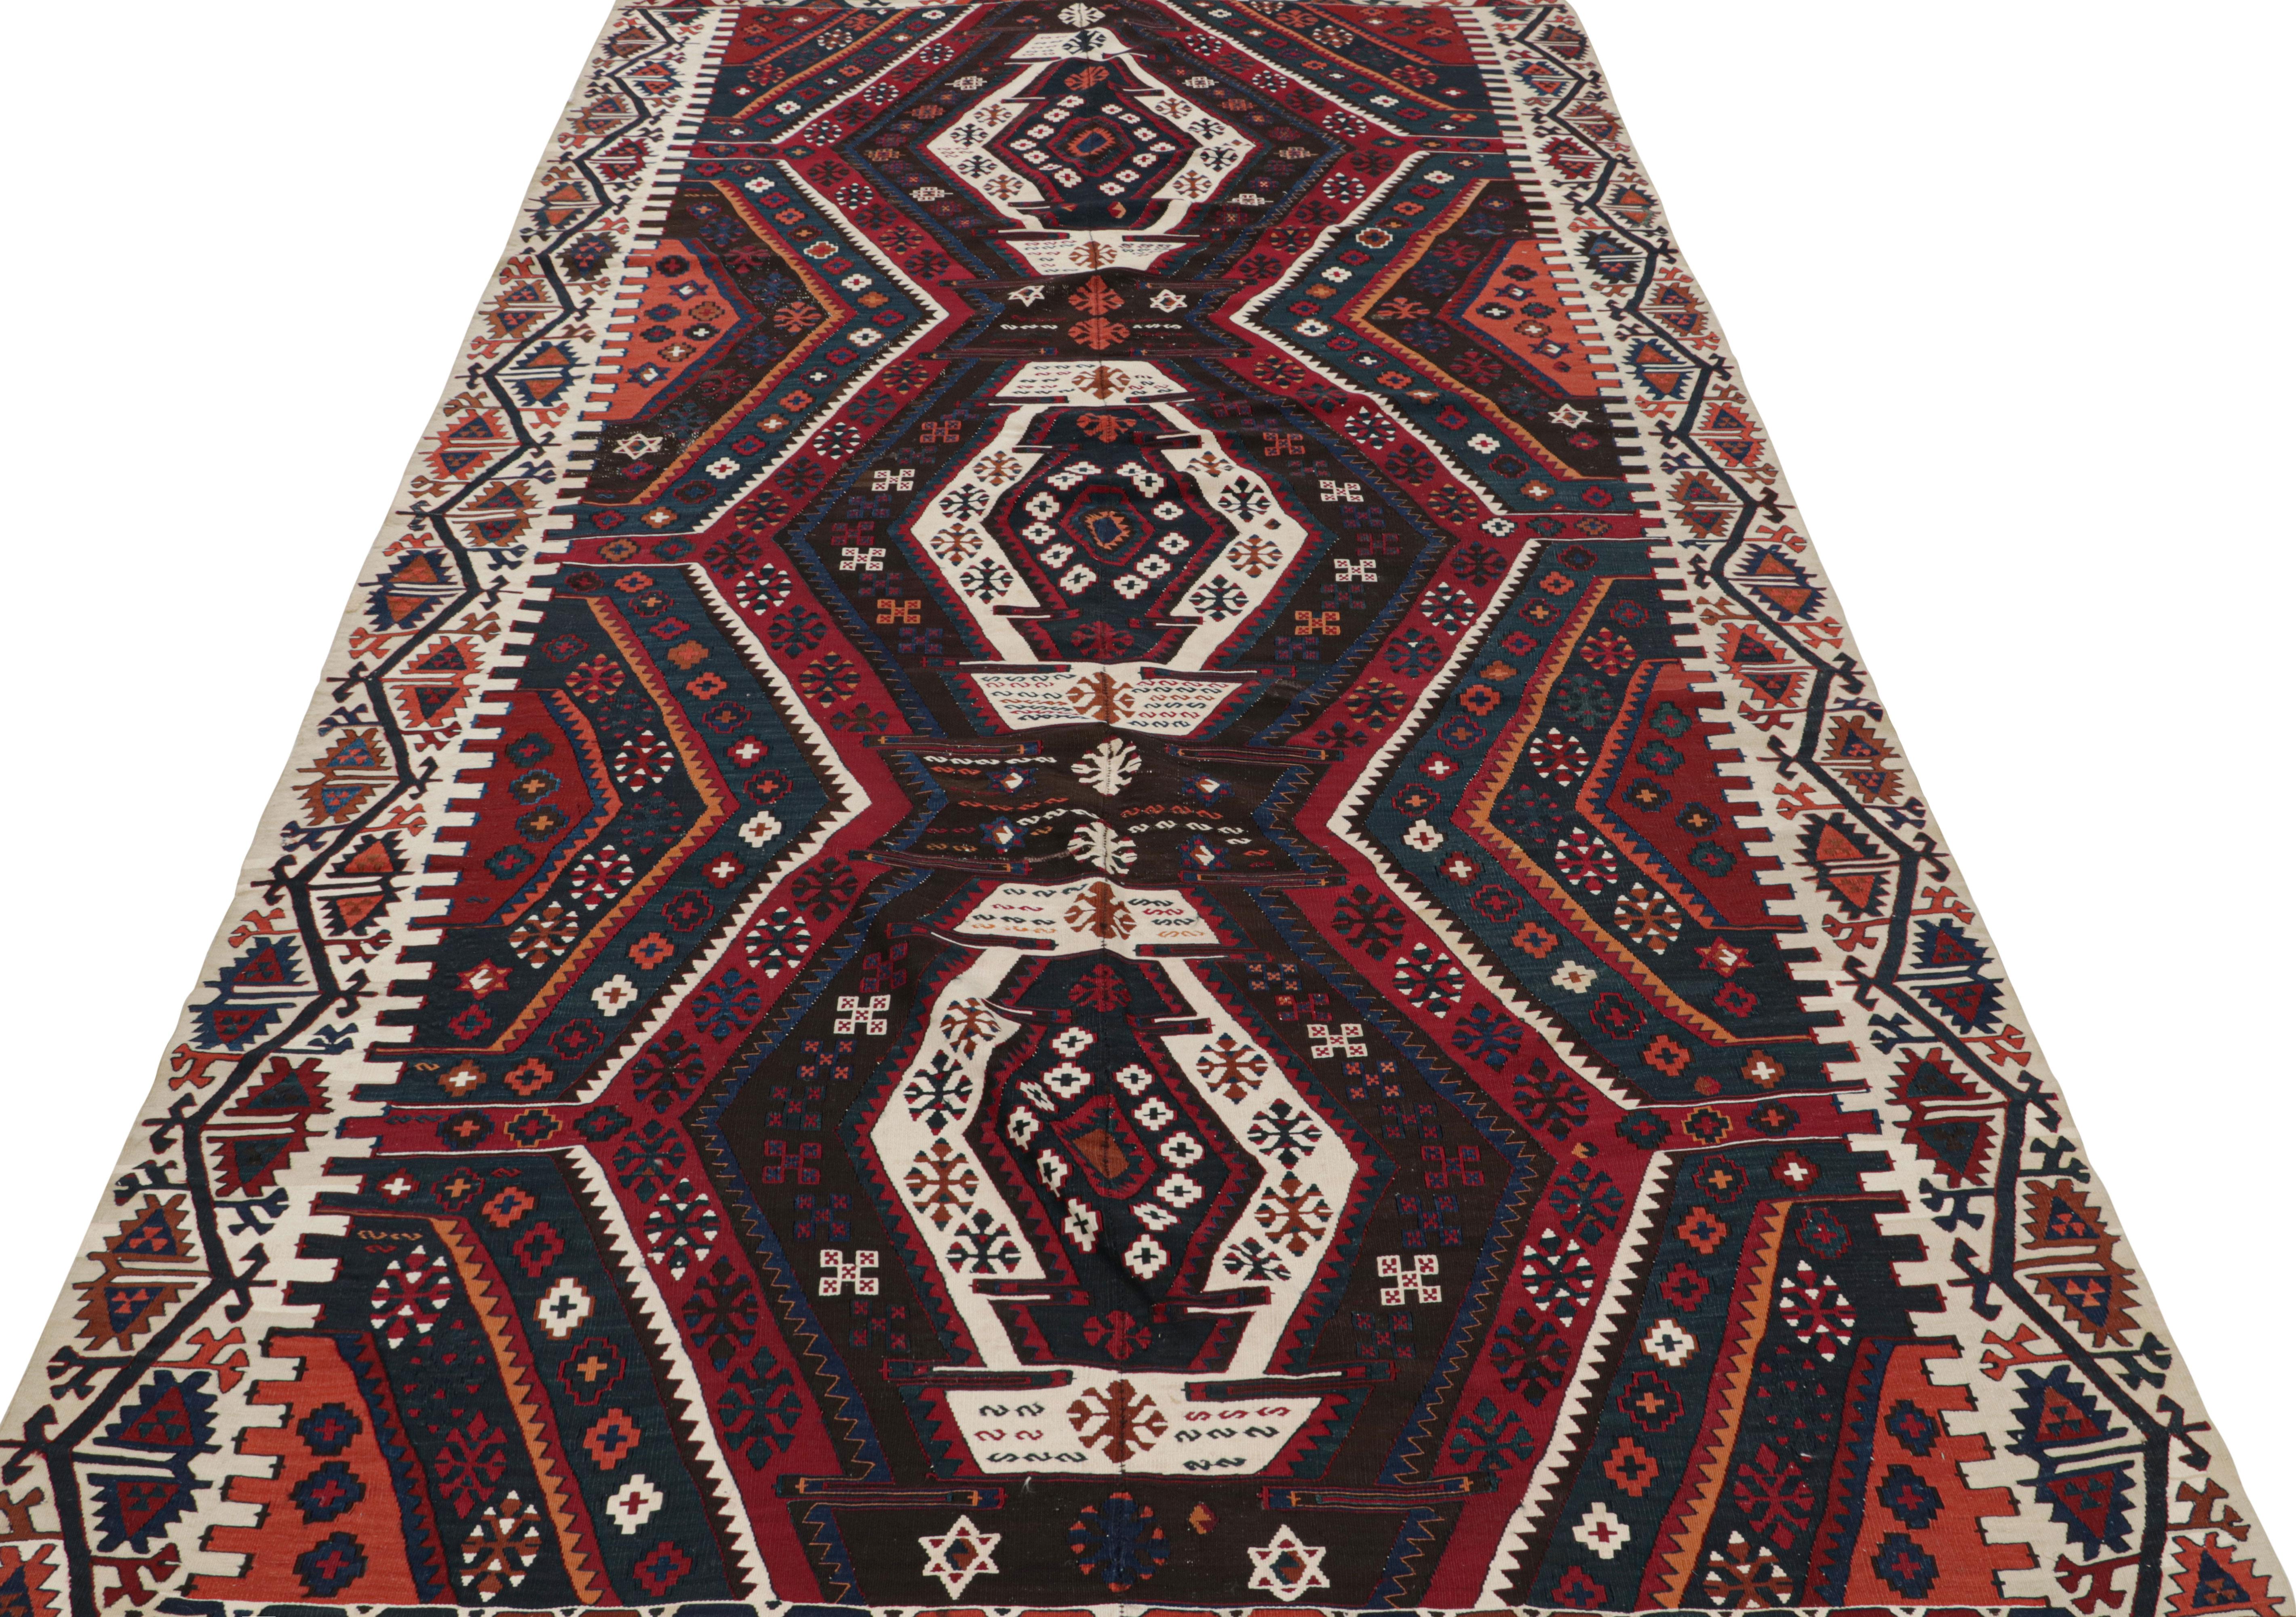 Hand-Woven Vintage Turkish Kilim with Polychromatic Geometric Patterns, from Rug & Kilim For Sale